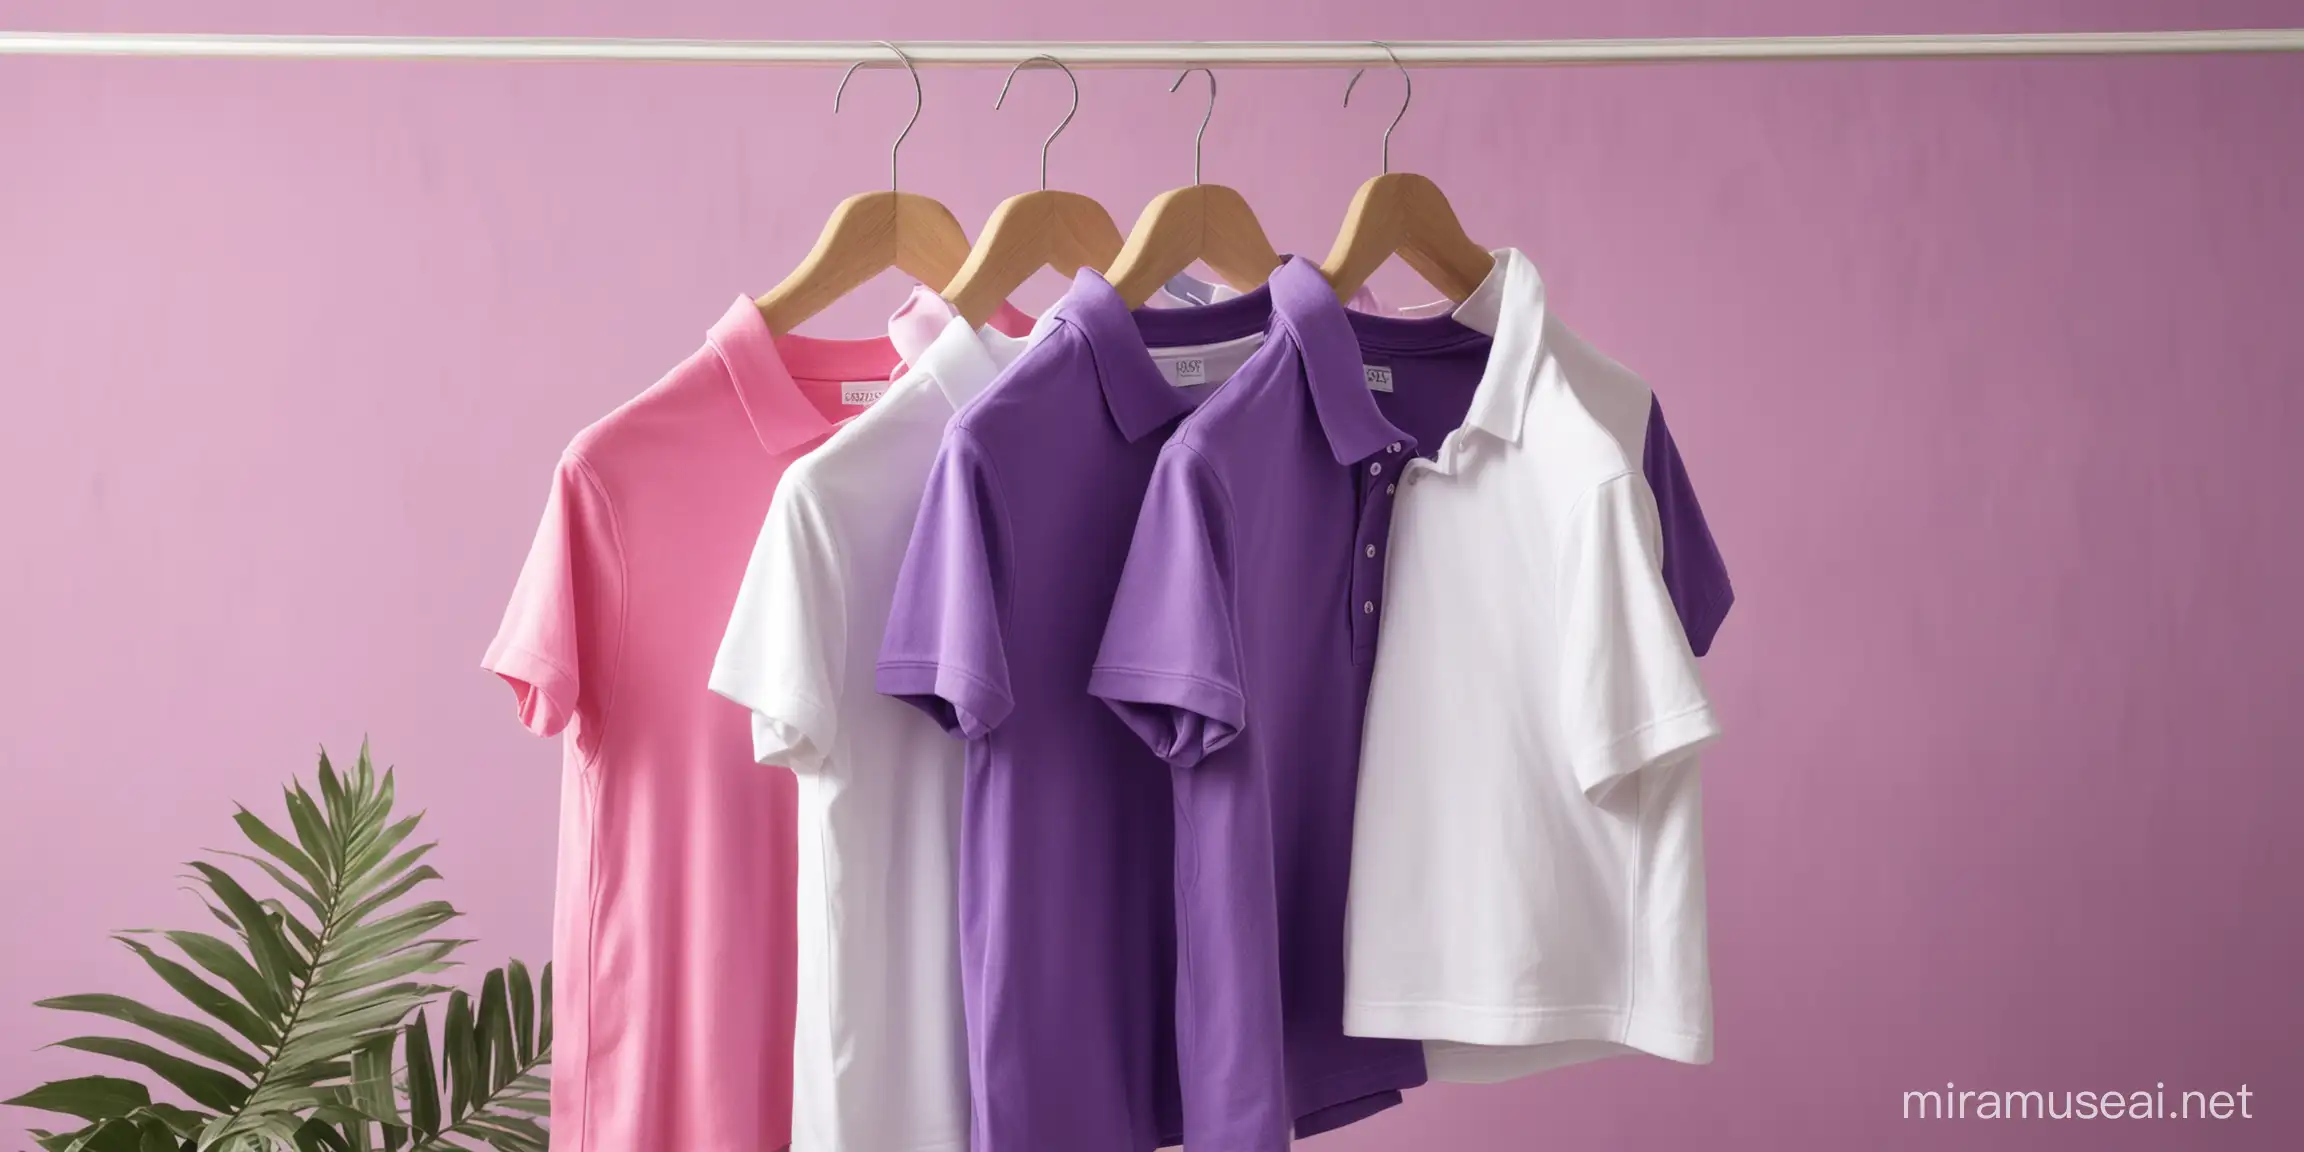 3 Polo T shirts hanging in a hanger, T Shirts color, first pink , second purple and third one is white , summer theme blurred background , with some leaf elements